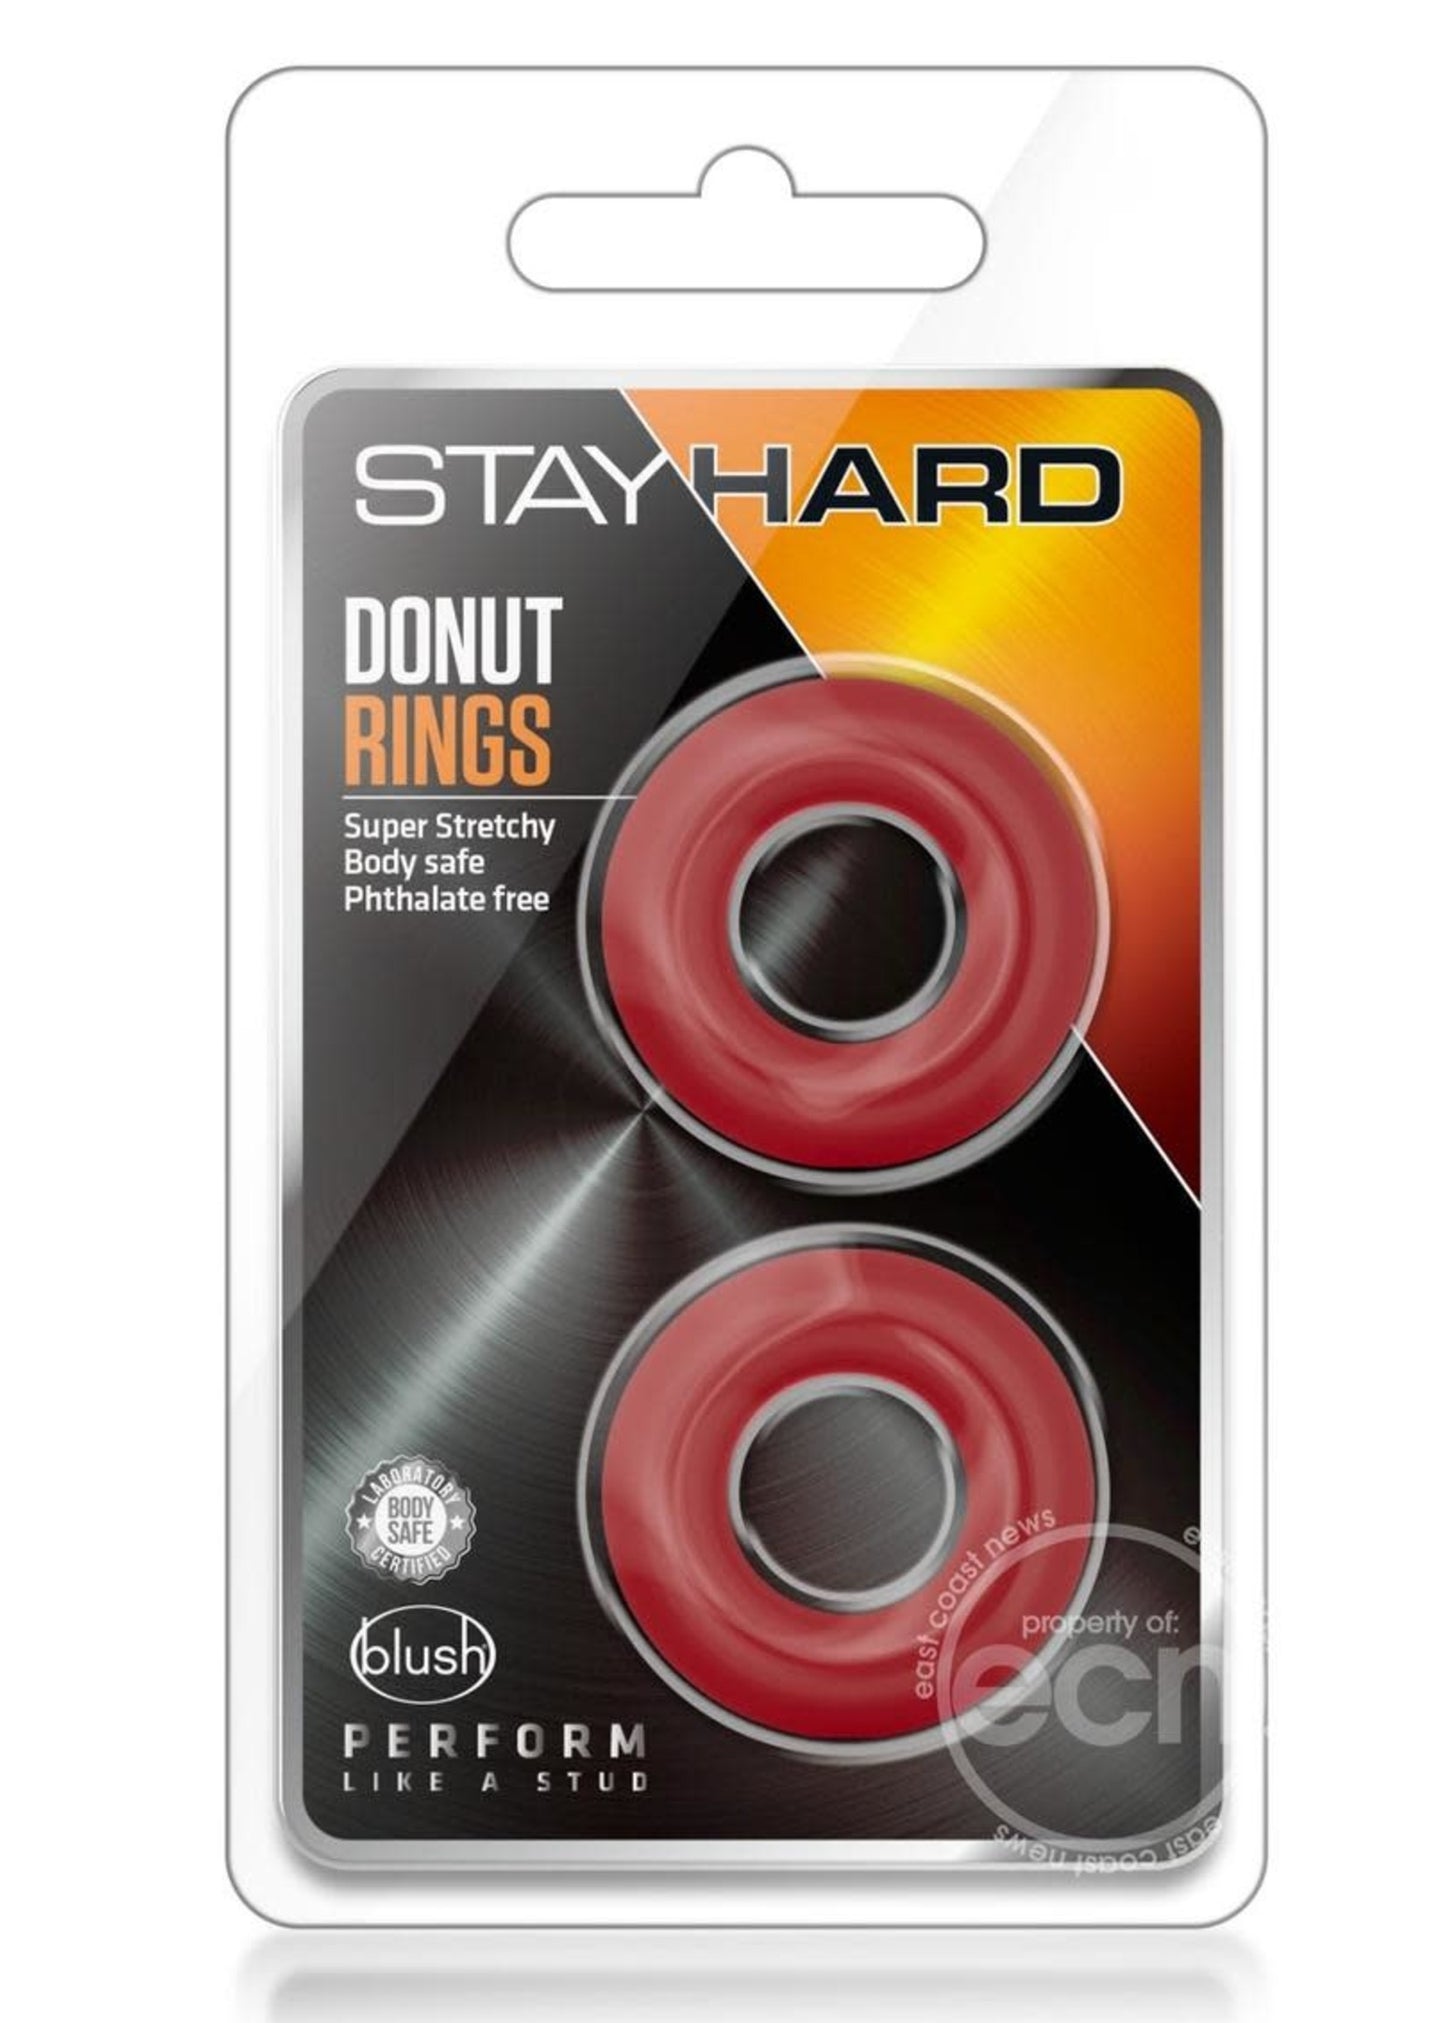 Stay Hard Donut Cock Rings